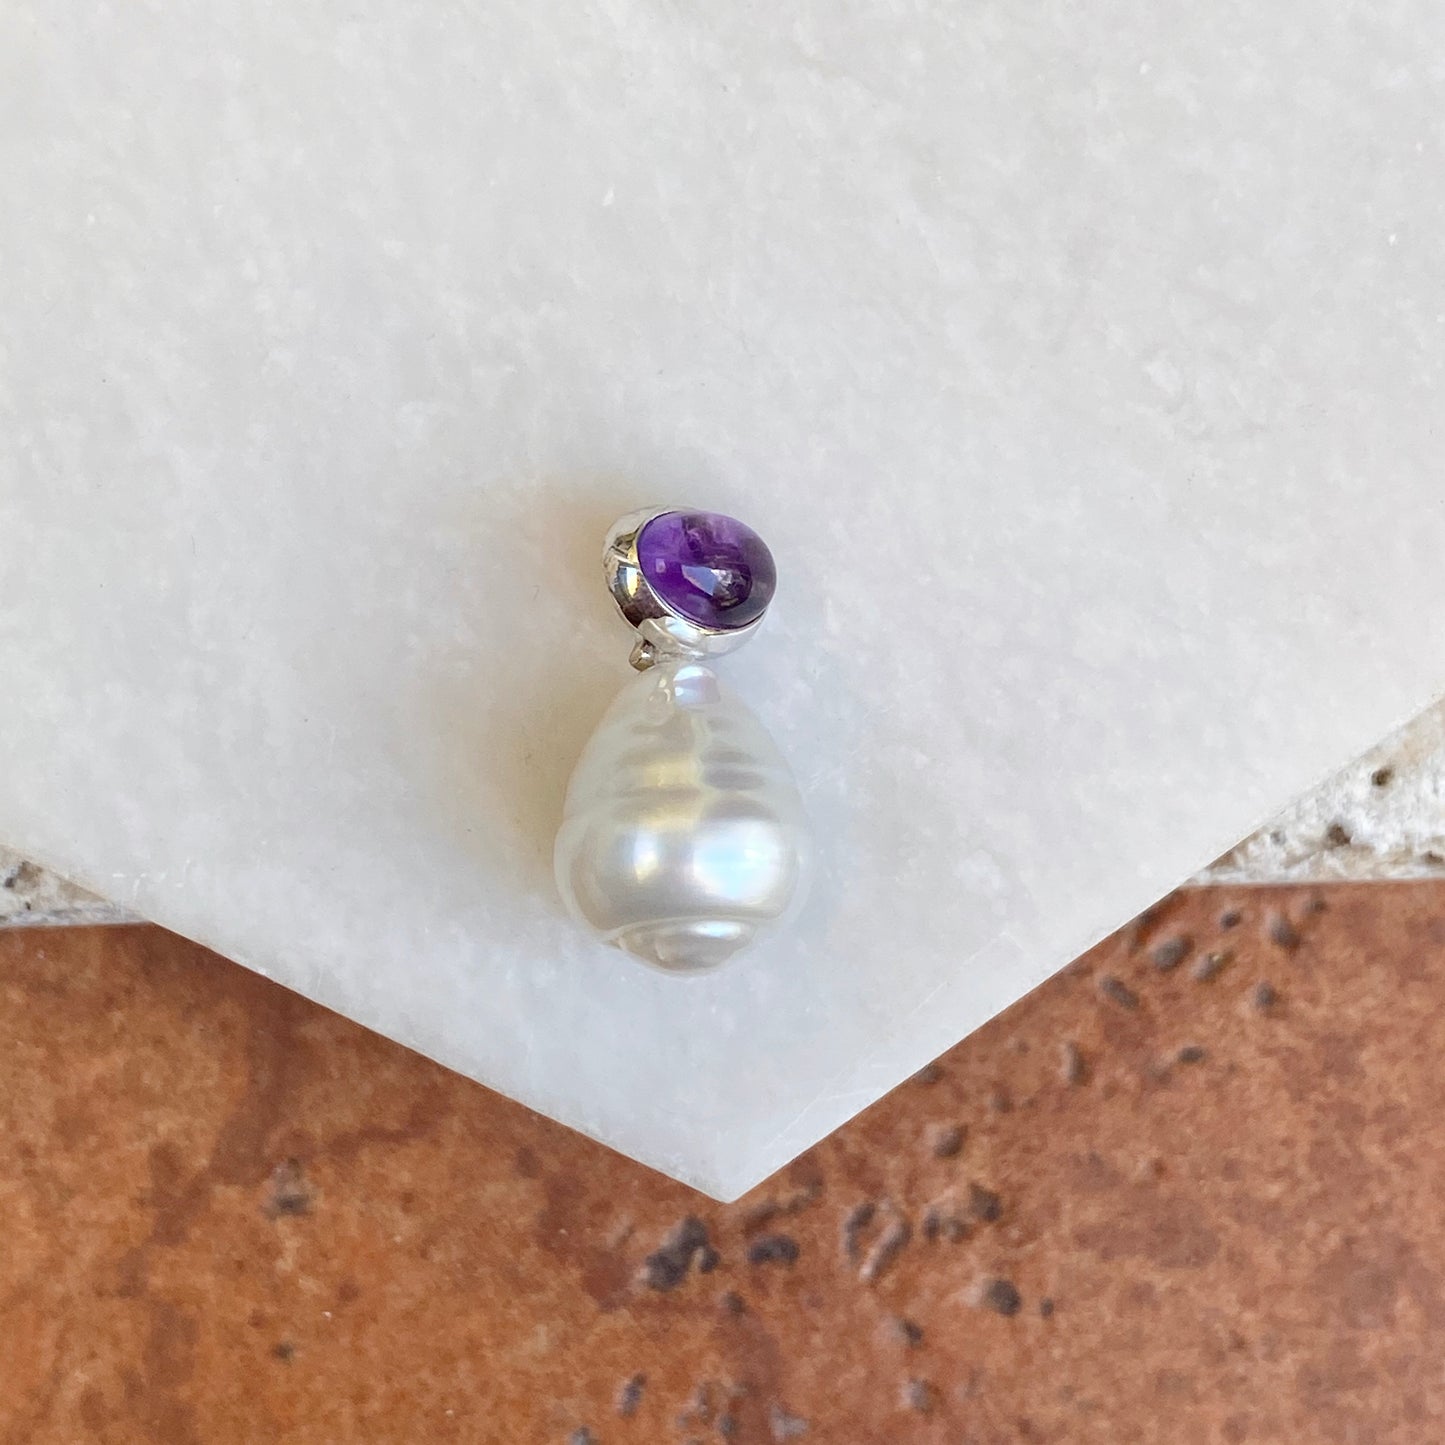 14KT White Gold Cabochon Amethyst + 11mm Paspaley South Sea Pearl Pendant Slide #3